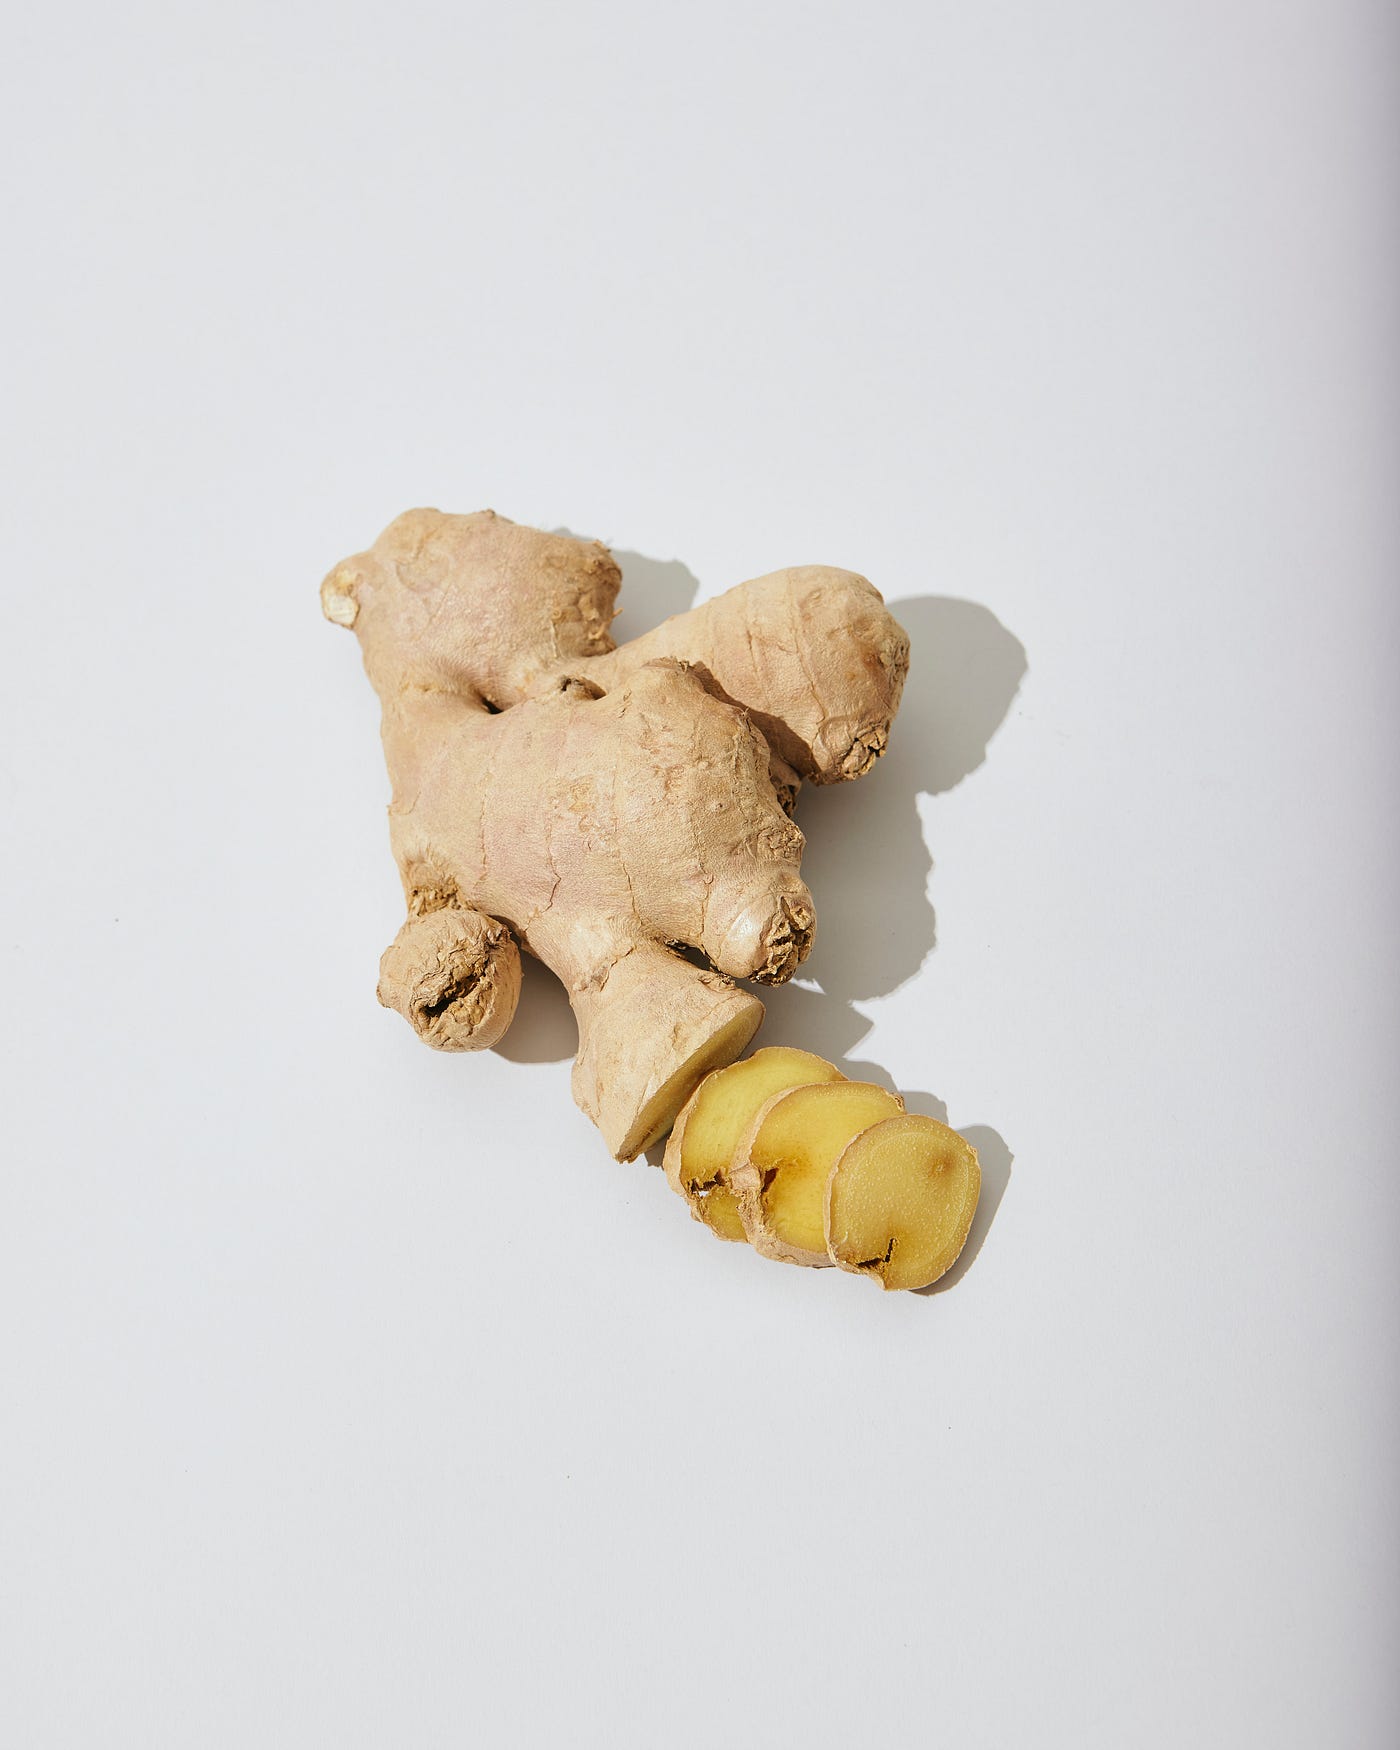 Spice Up Your Life: 10 Surprising Health Benefits of Ginger You Never Knew, by Kenneth C. Chukwuka